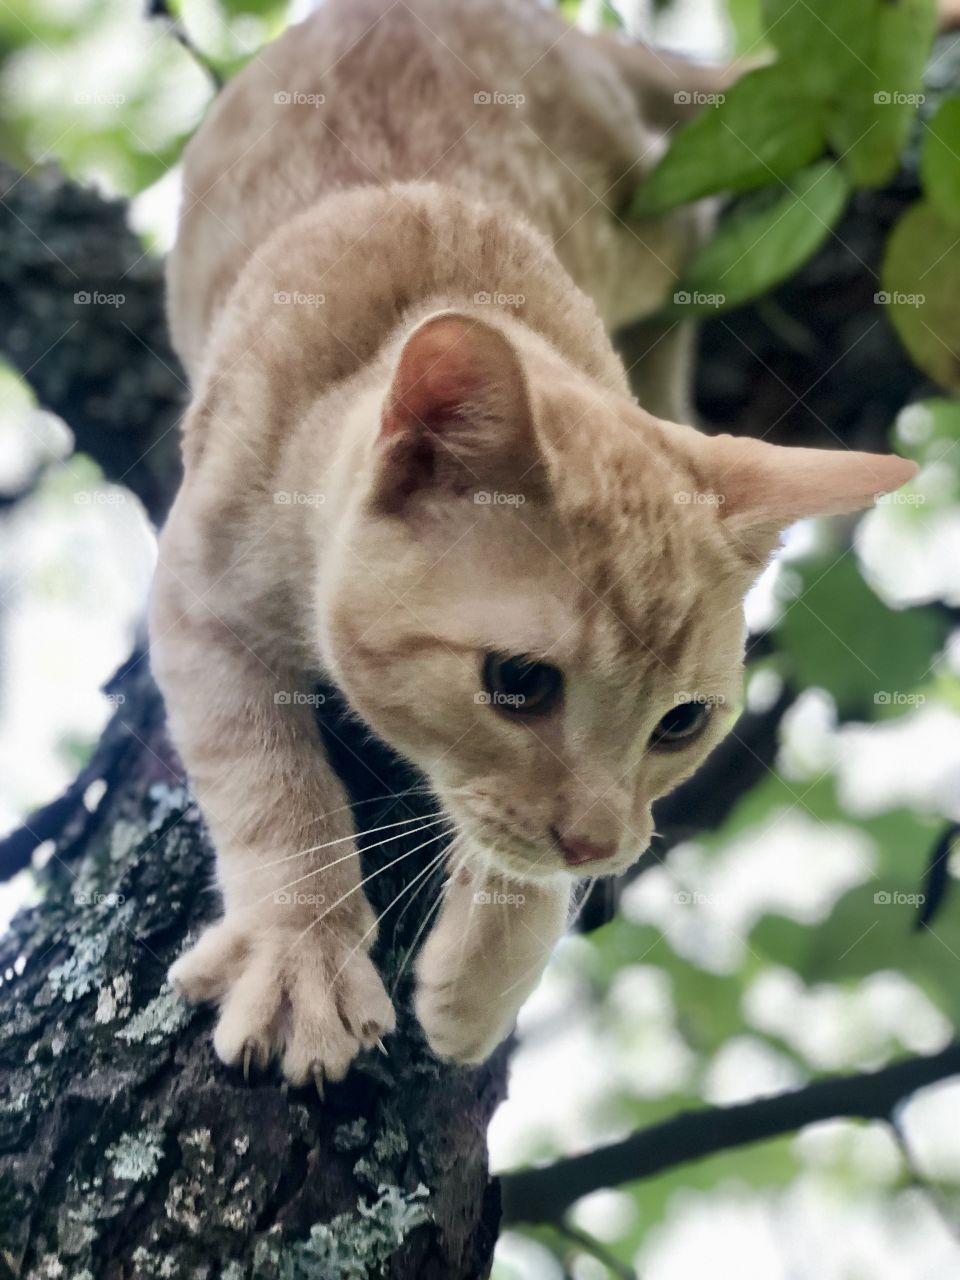 Ginger cat climbing tree for the first time